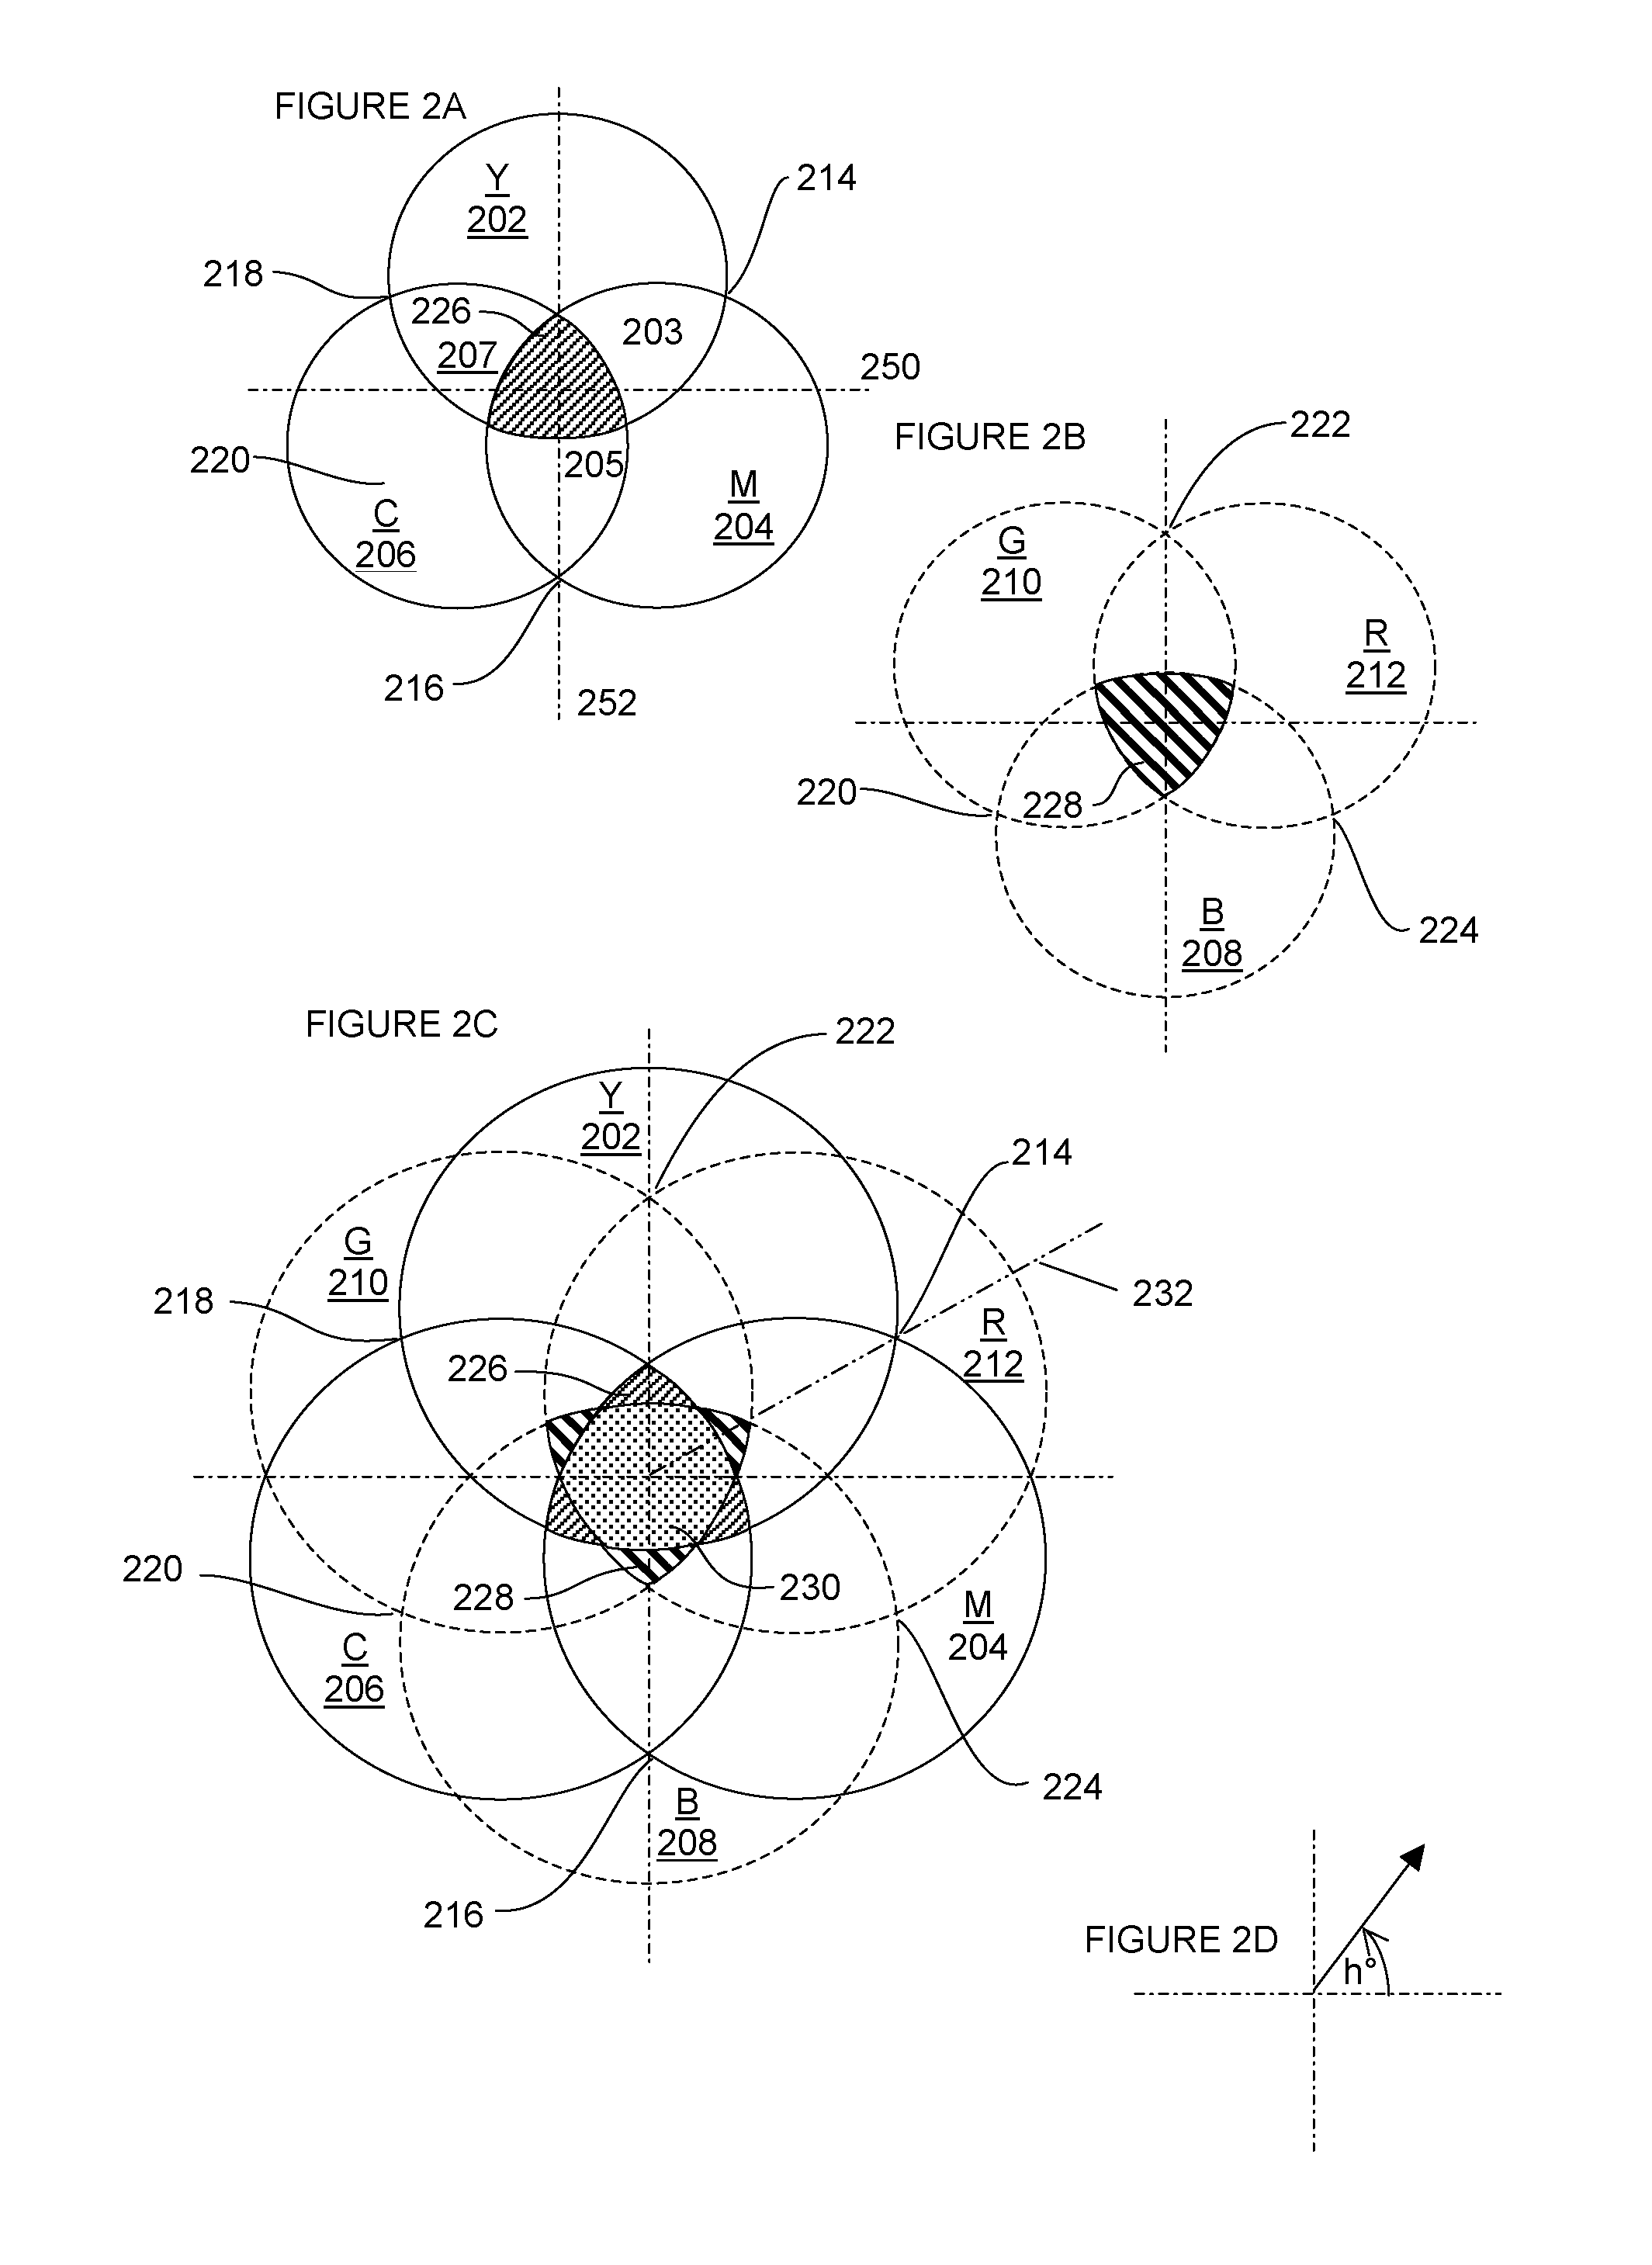 Color separation and reproduction method to control a printing process